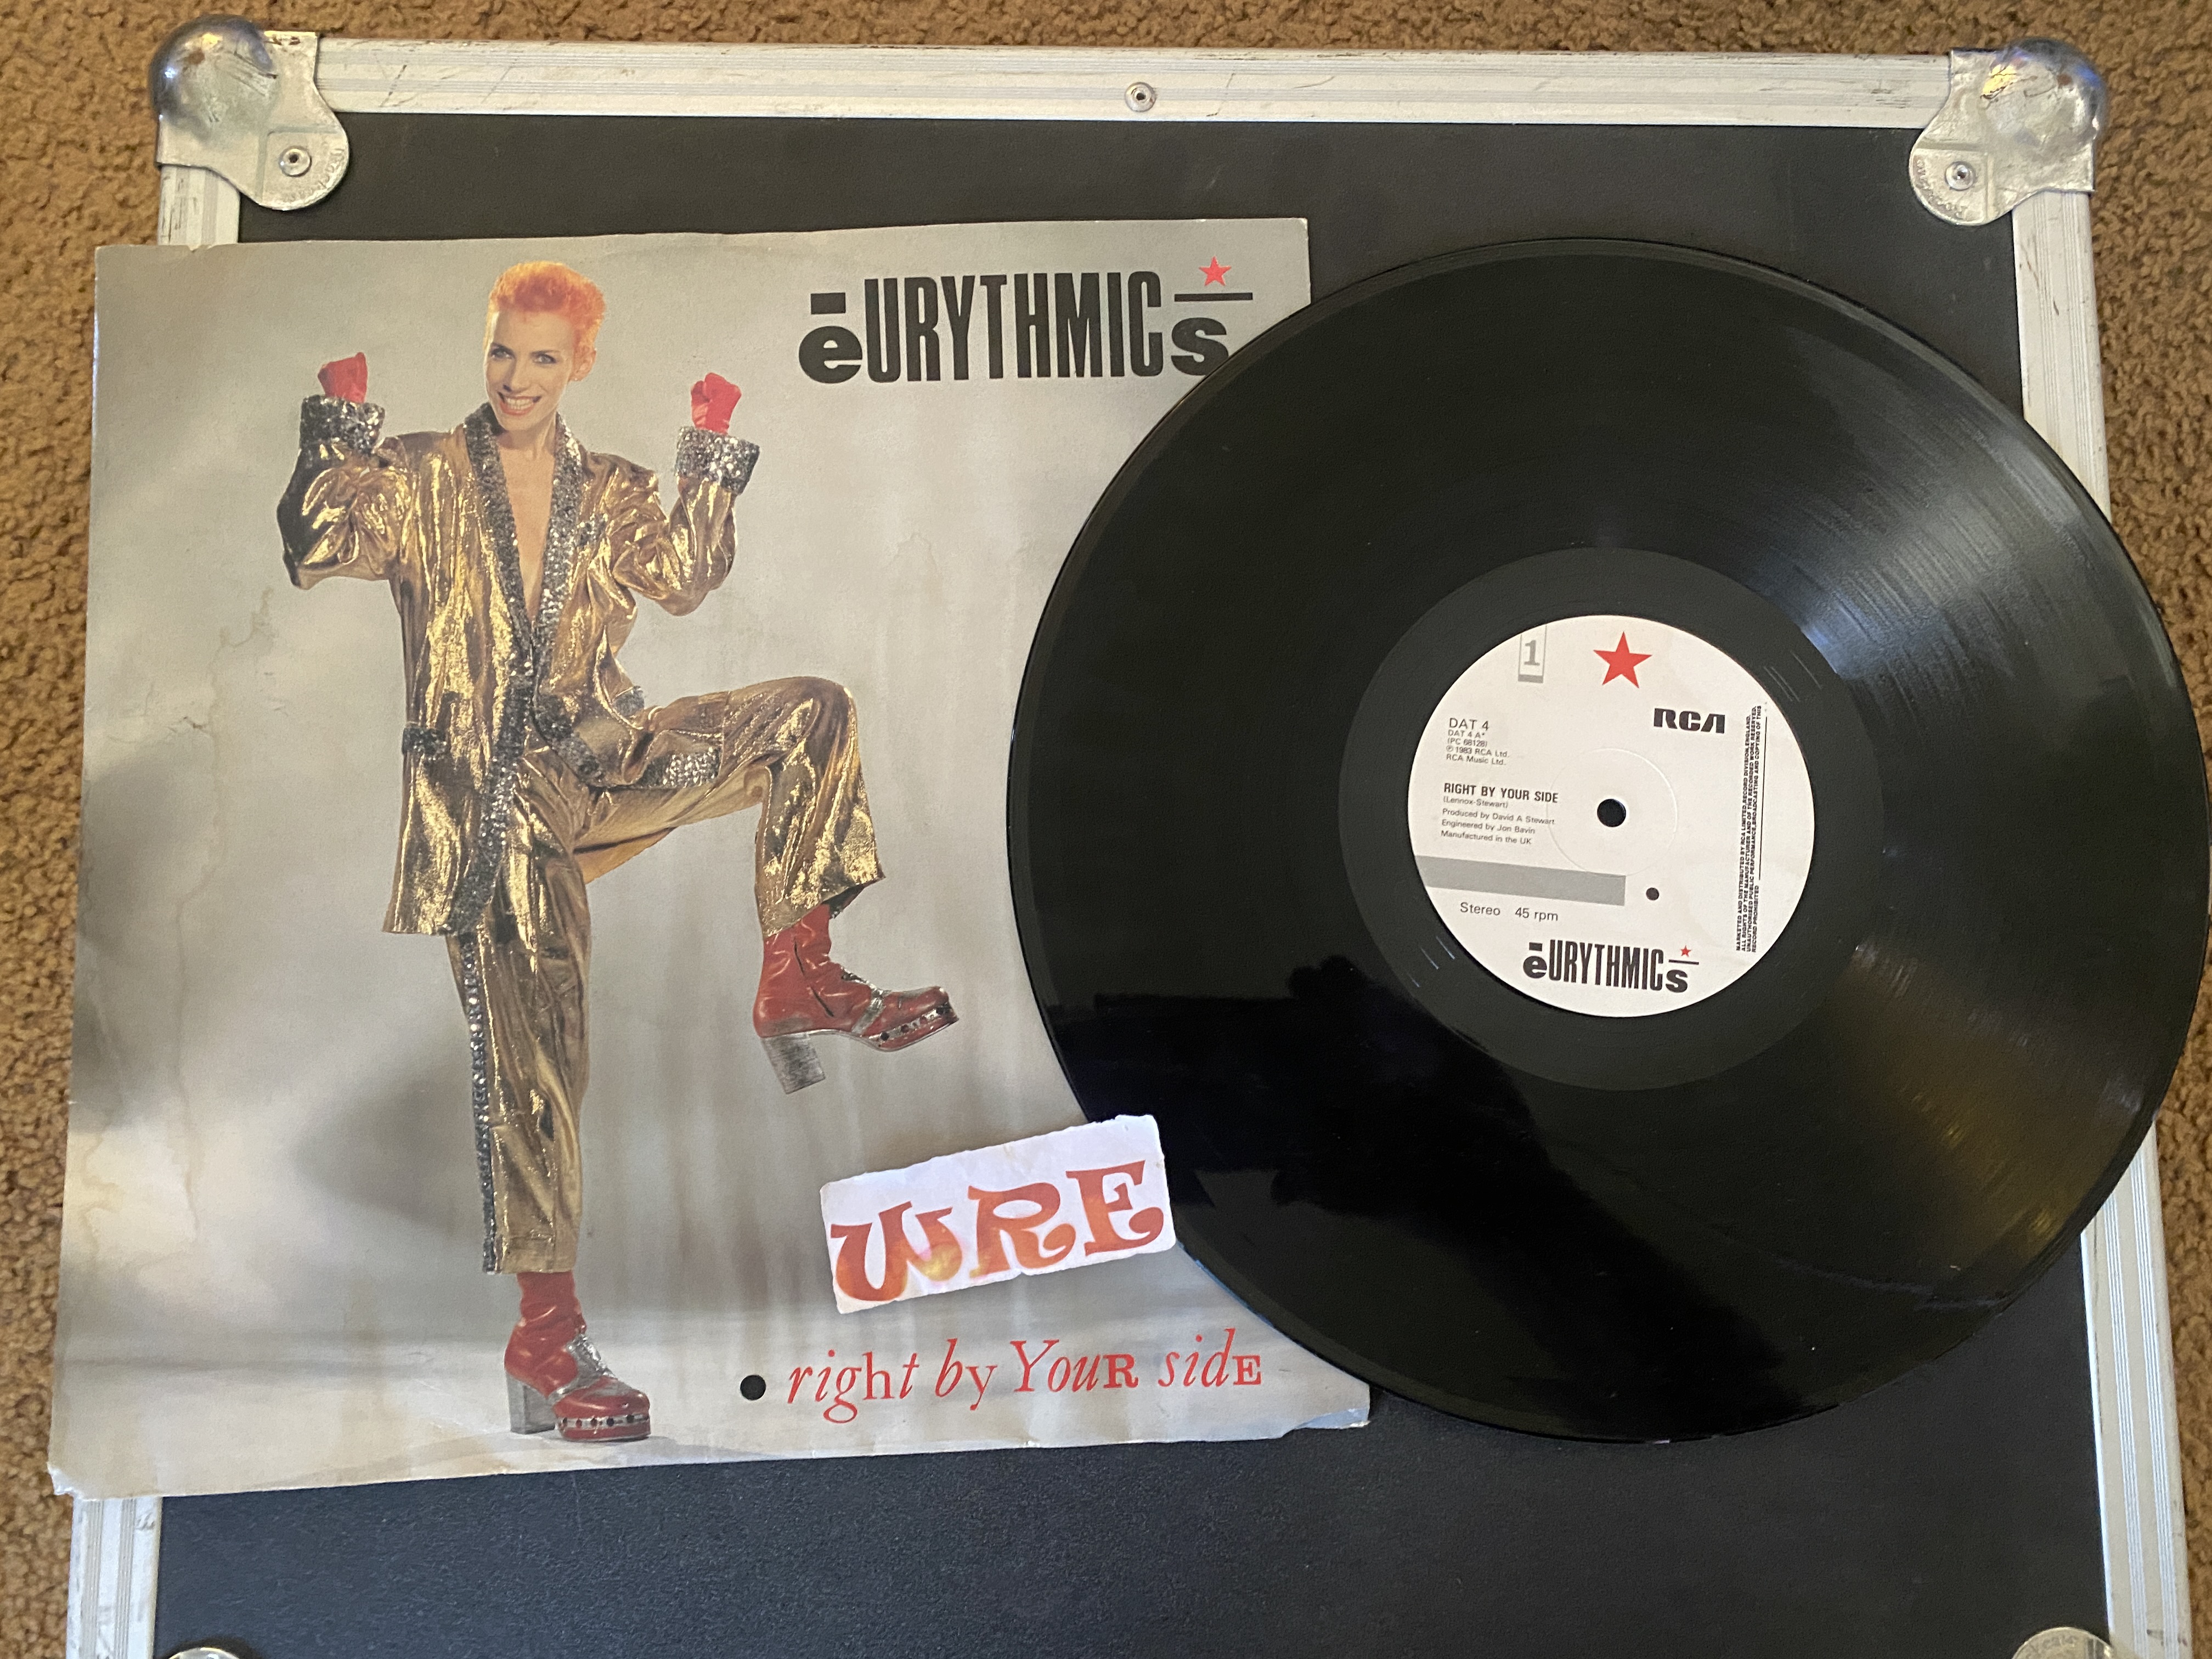 Eurythmics-Right By Your Side-(PC 68128)-VINYL-FLAC-1983-WRE